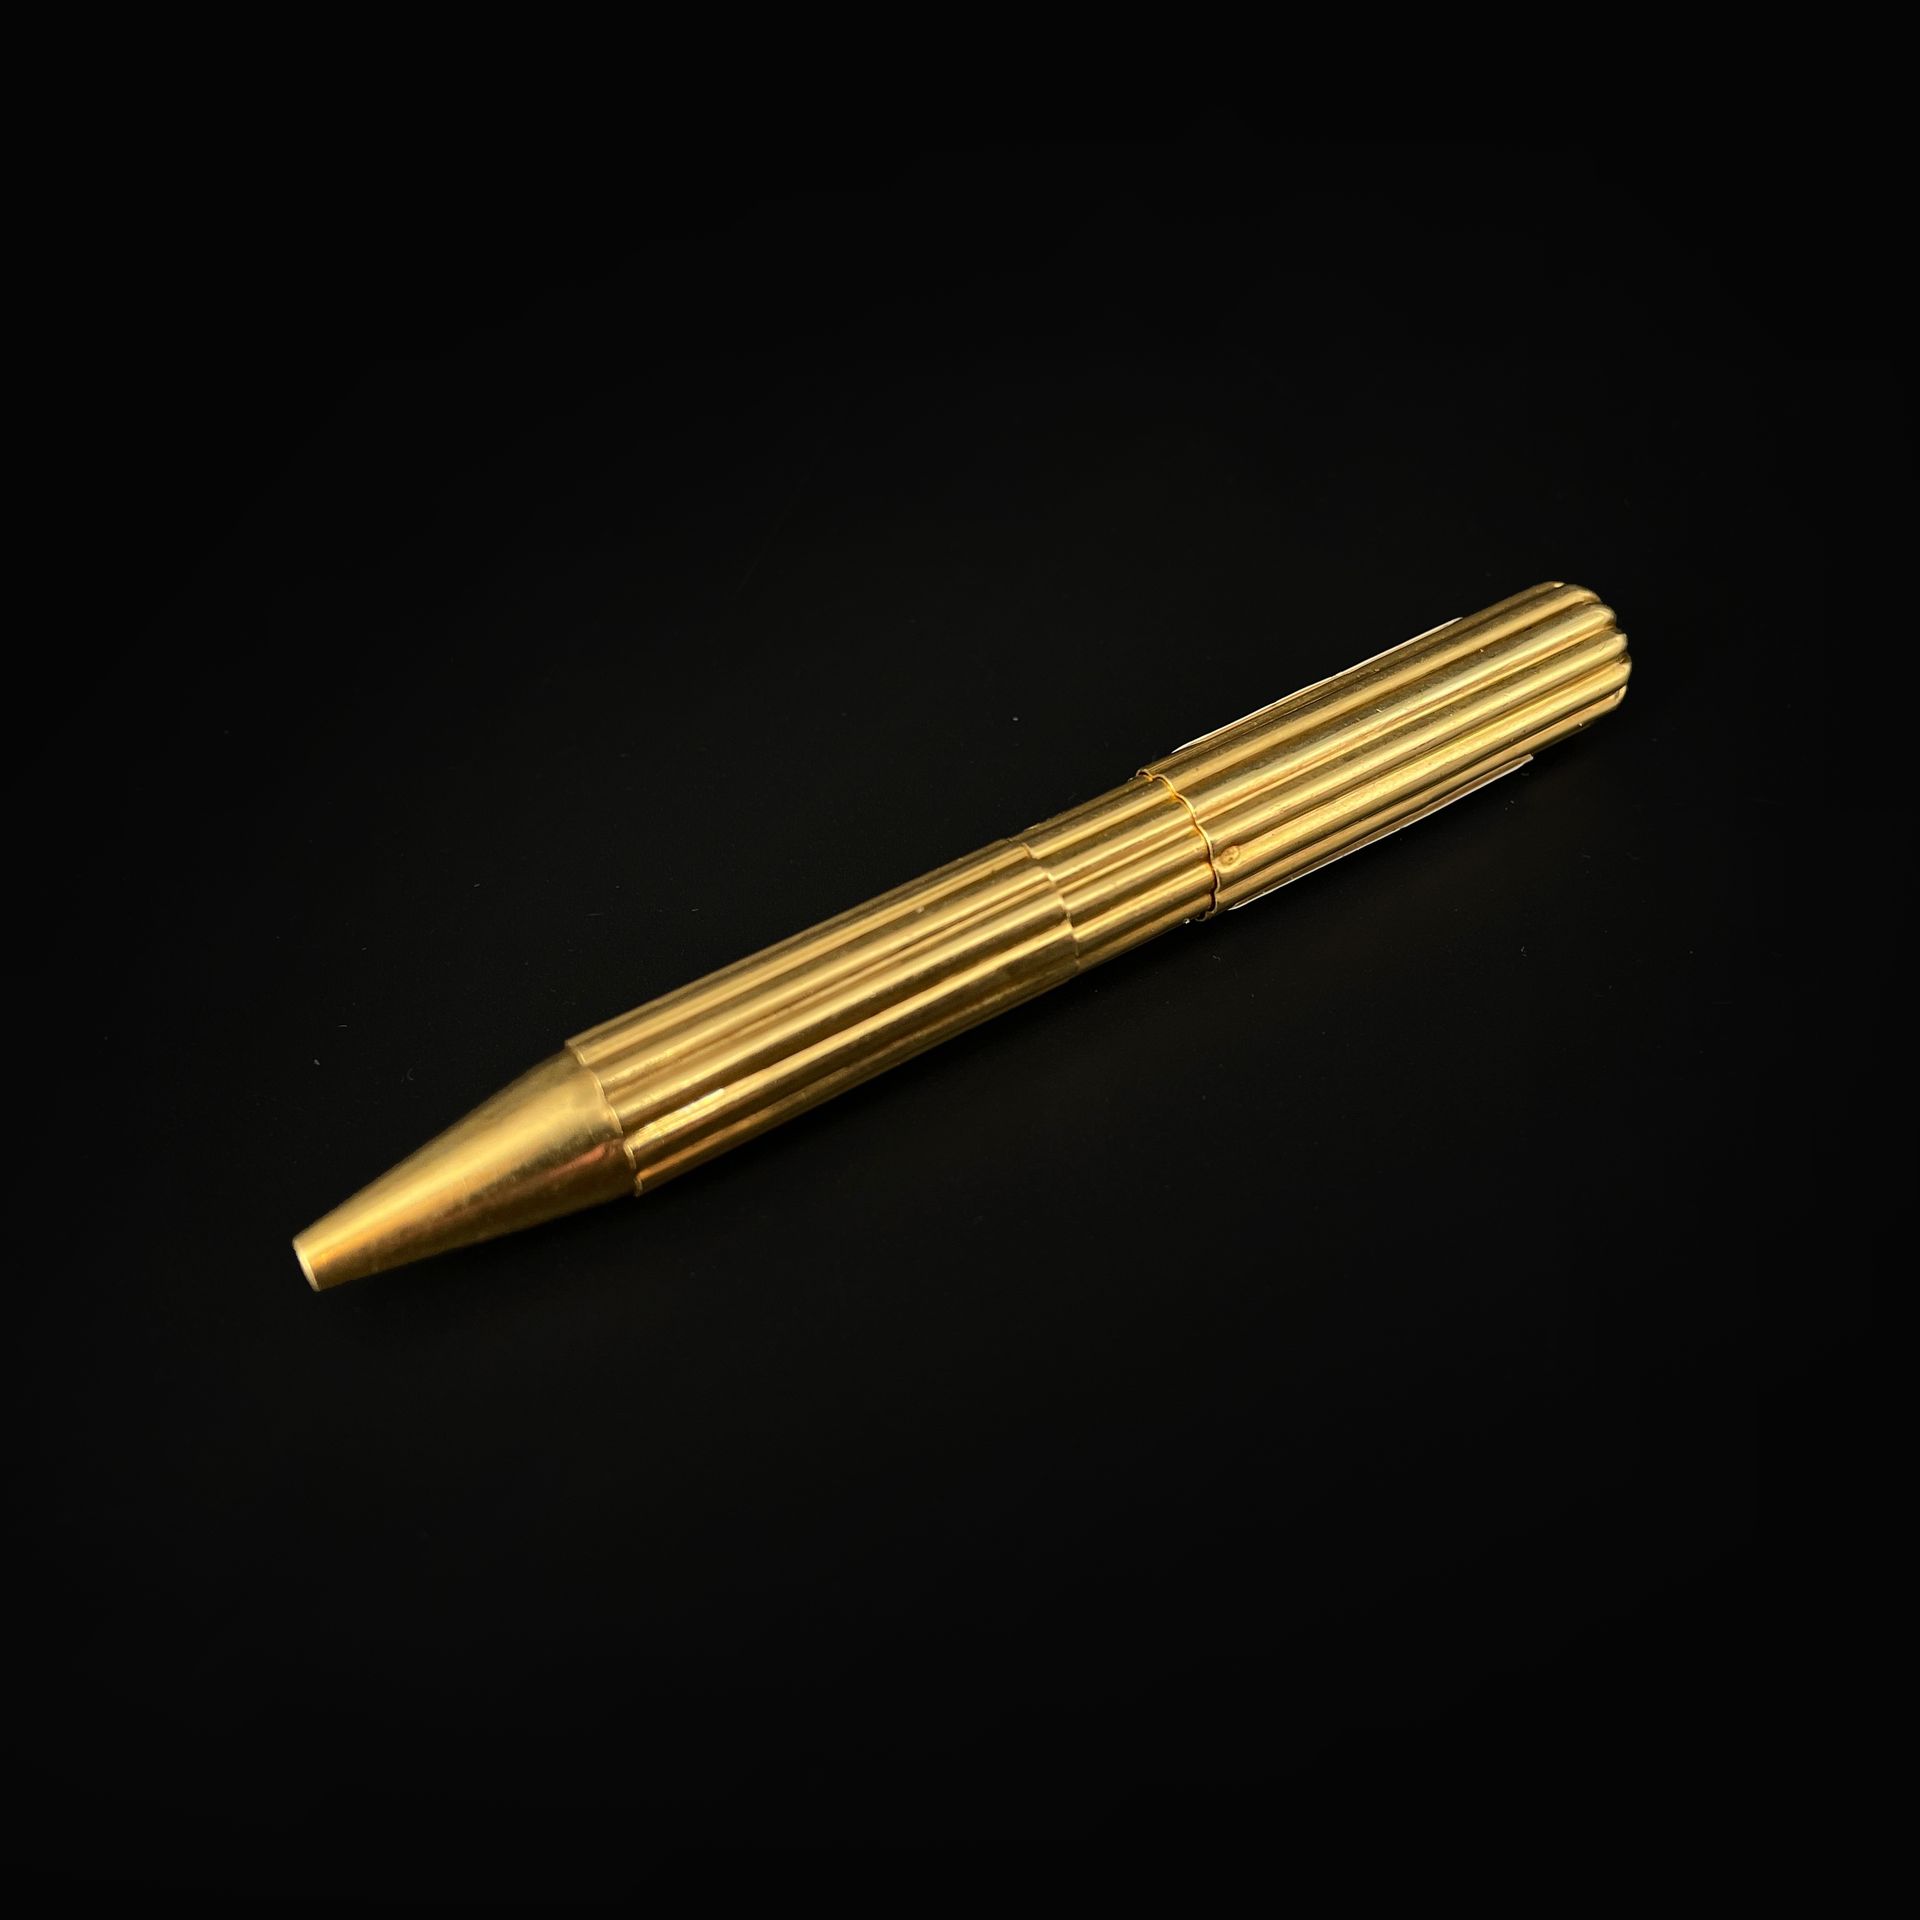 Null Mechanical pencil in gold 750 thousandth retractable Gross weight : 18 g.